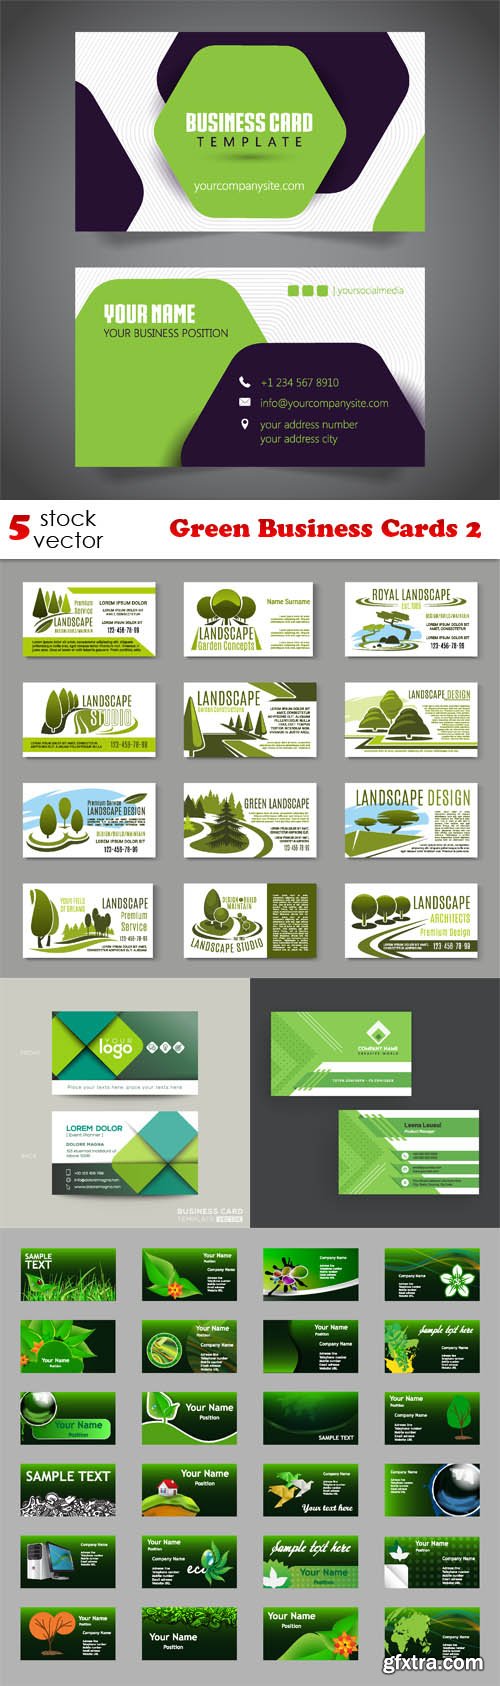 Vectors - Green Business Cards 2